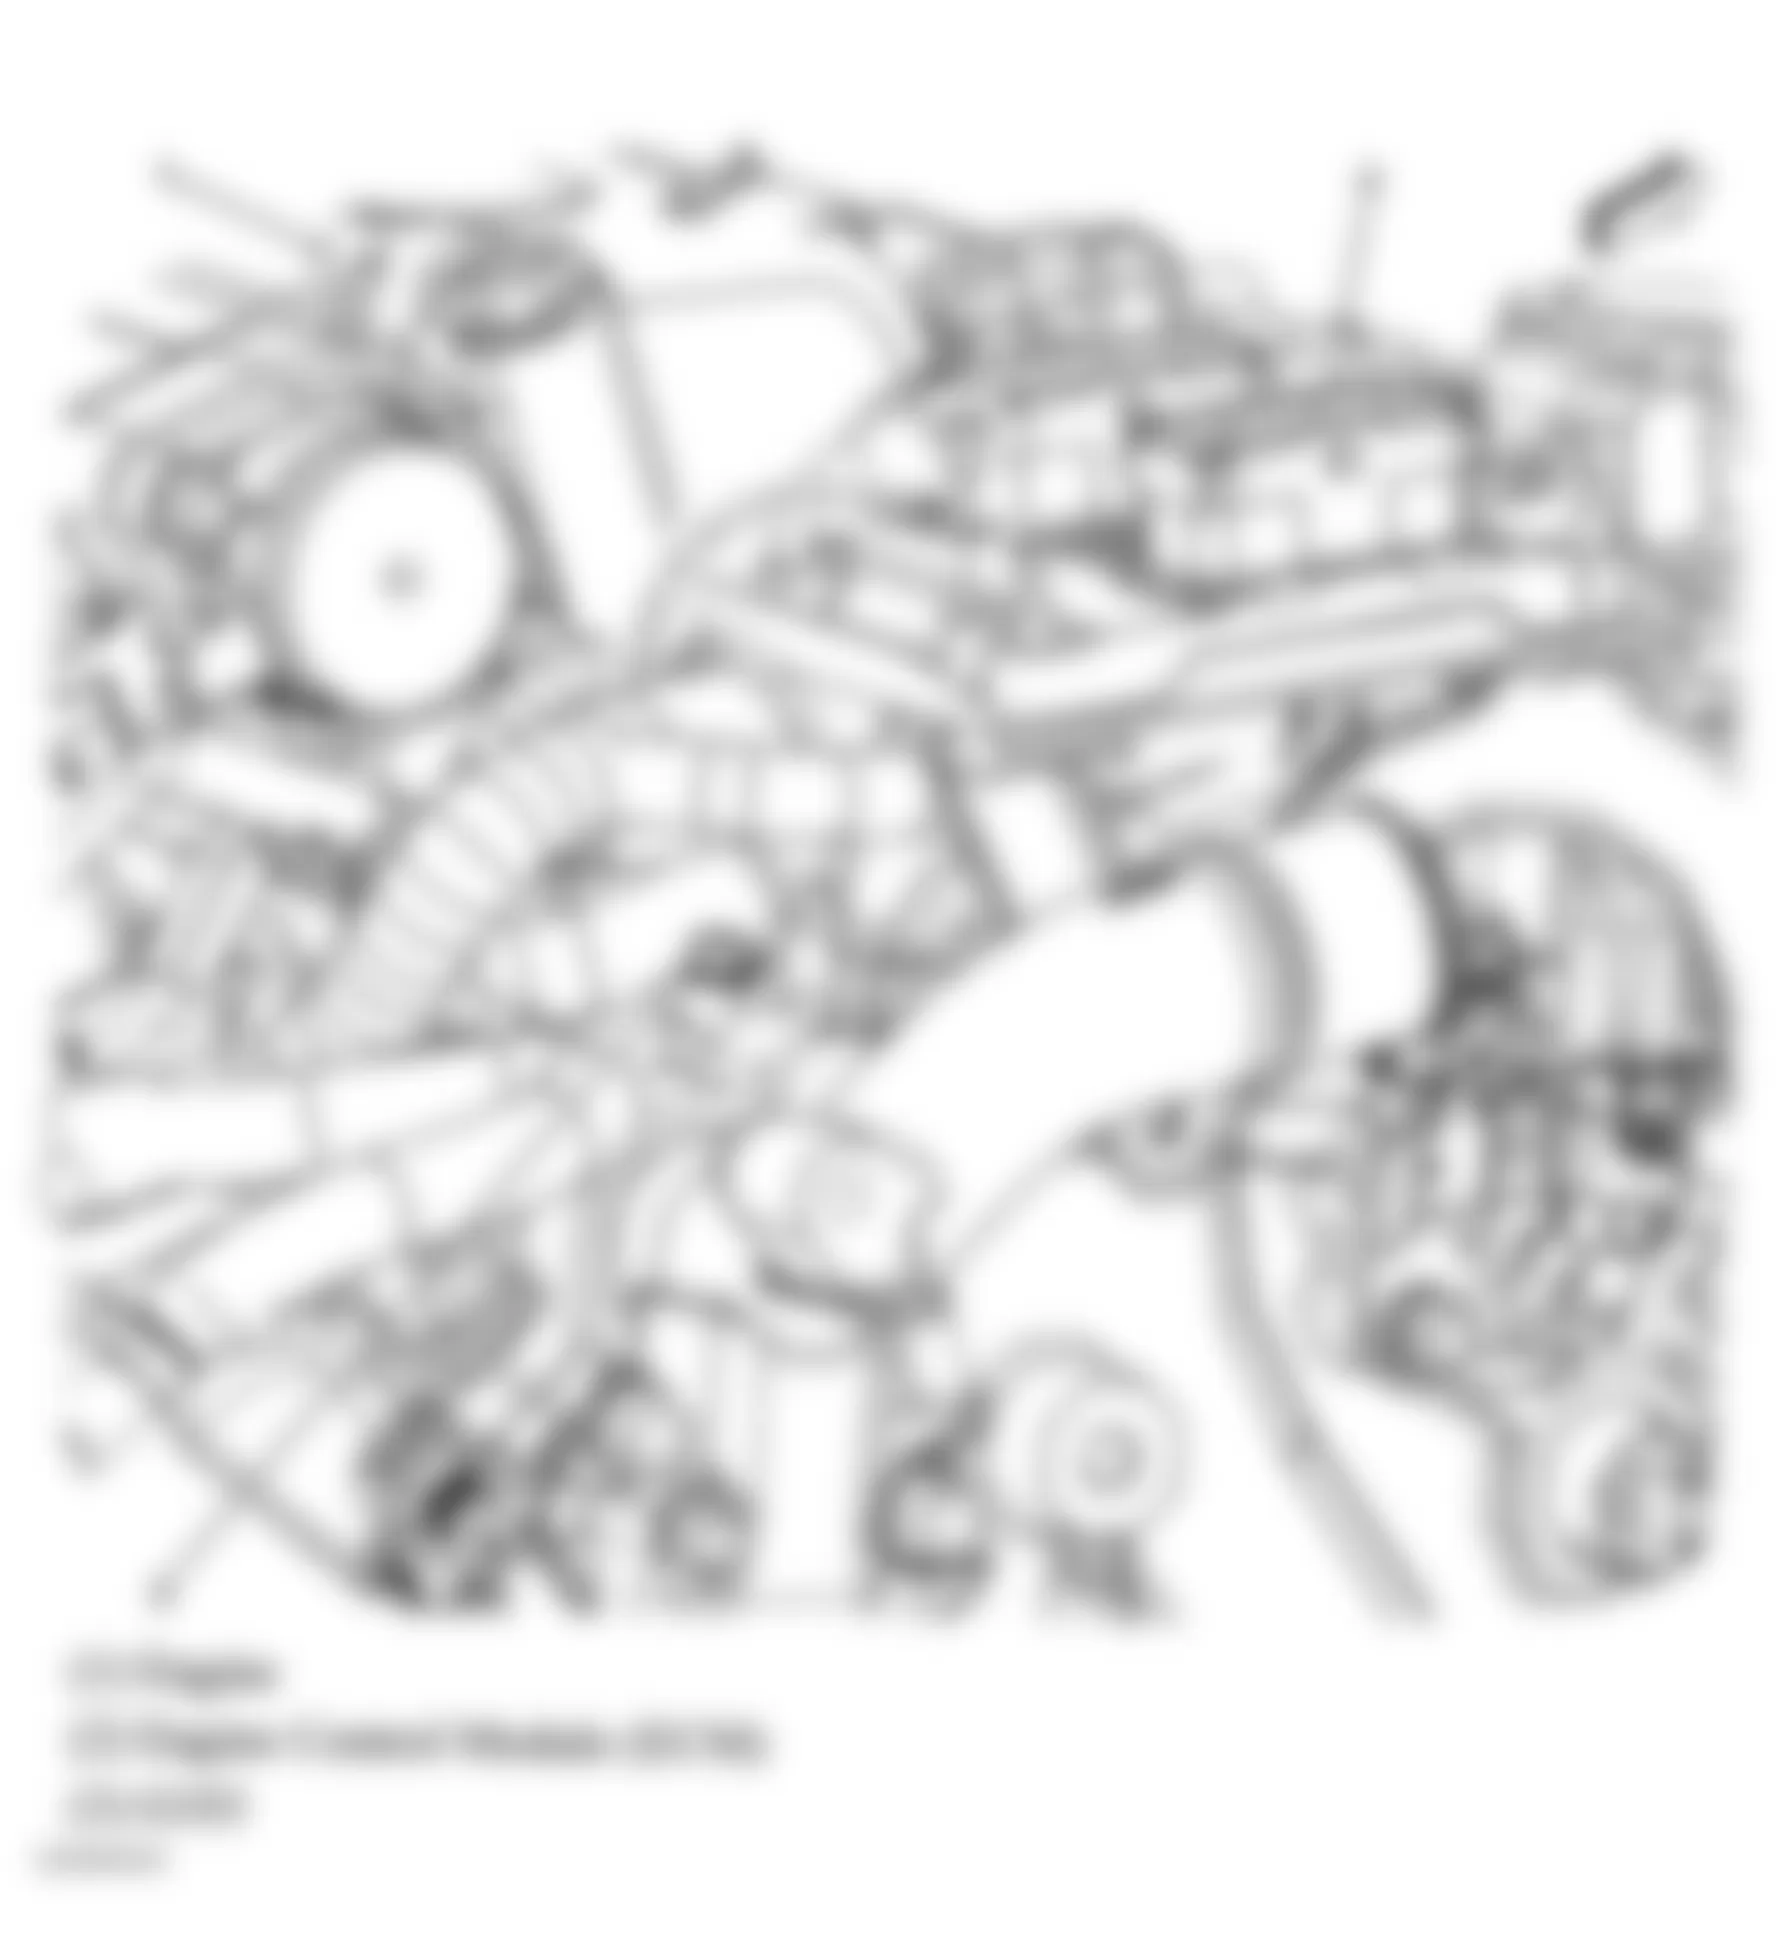 Buick LaCrosse CXL 2007 - Component Locations -  Engine Assembly (3.6L)